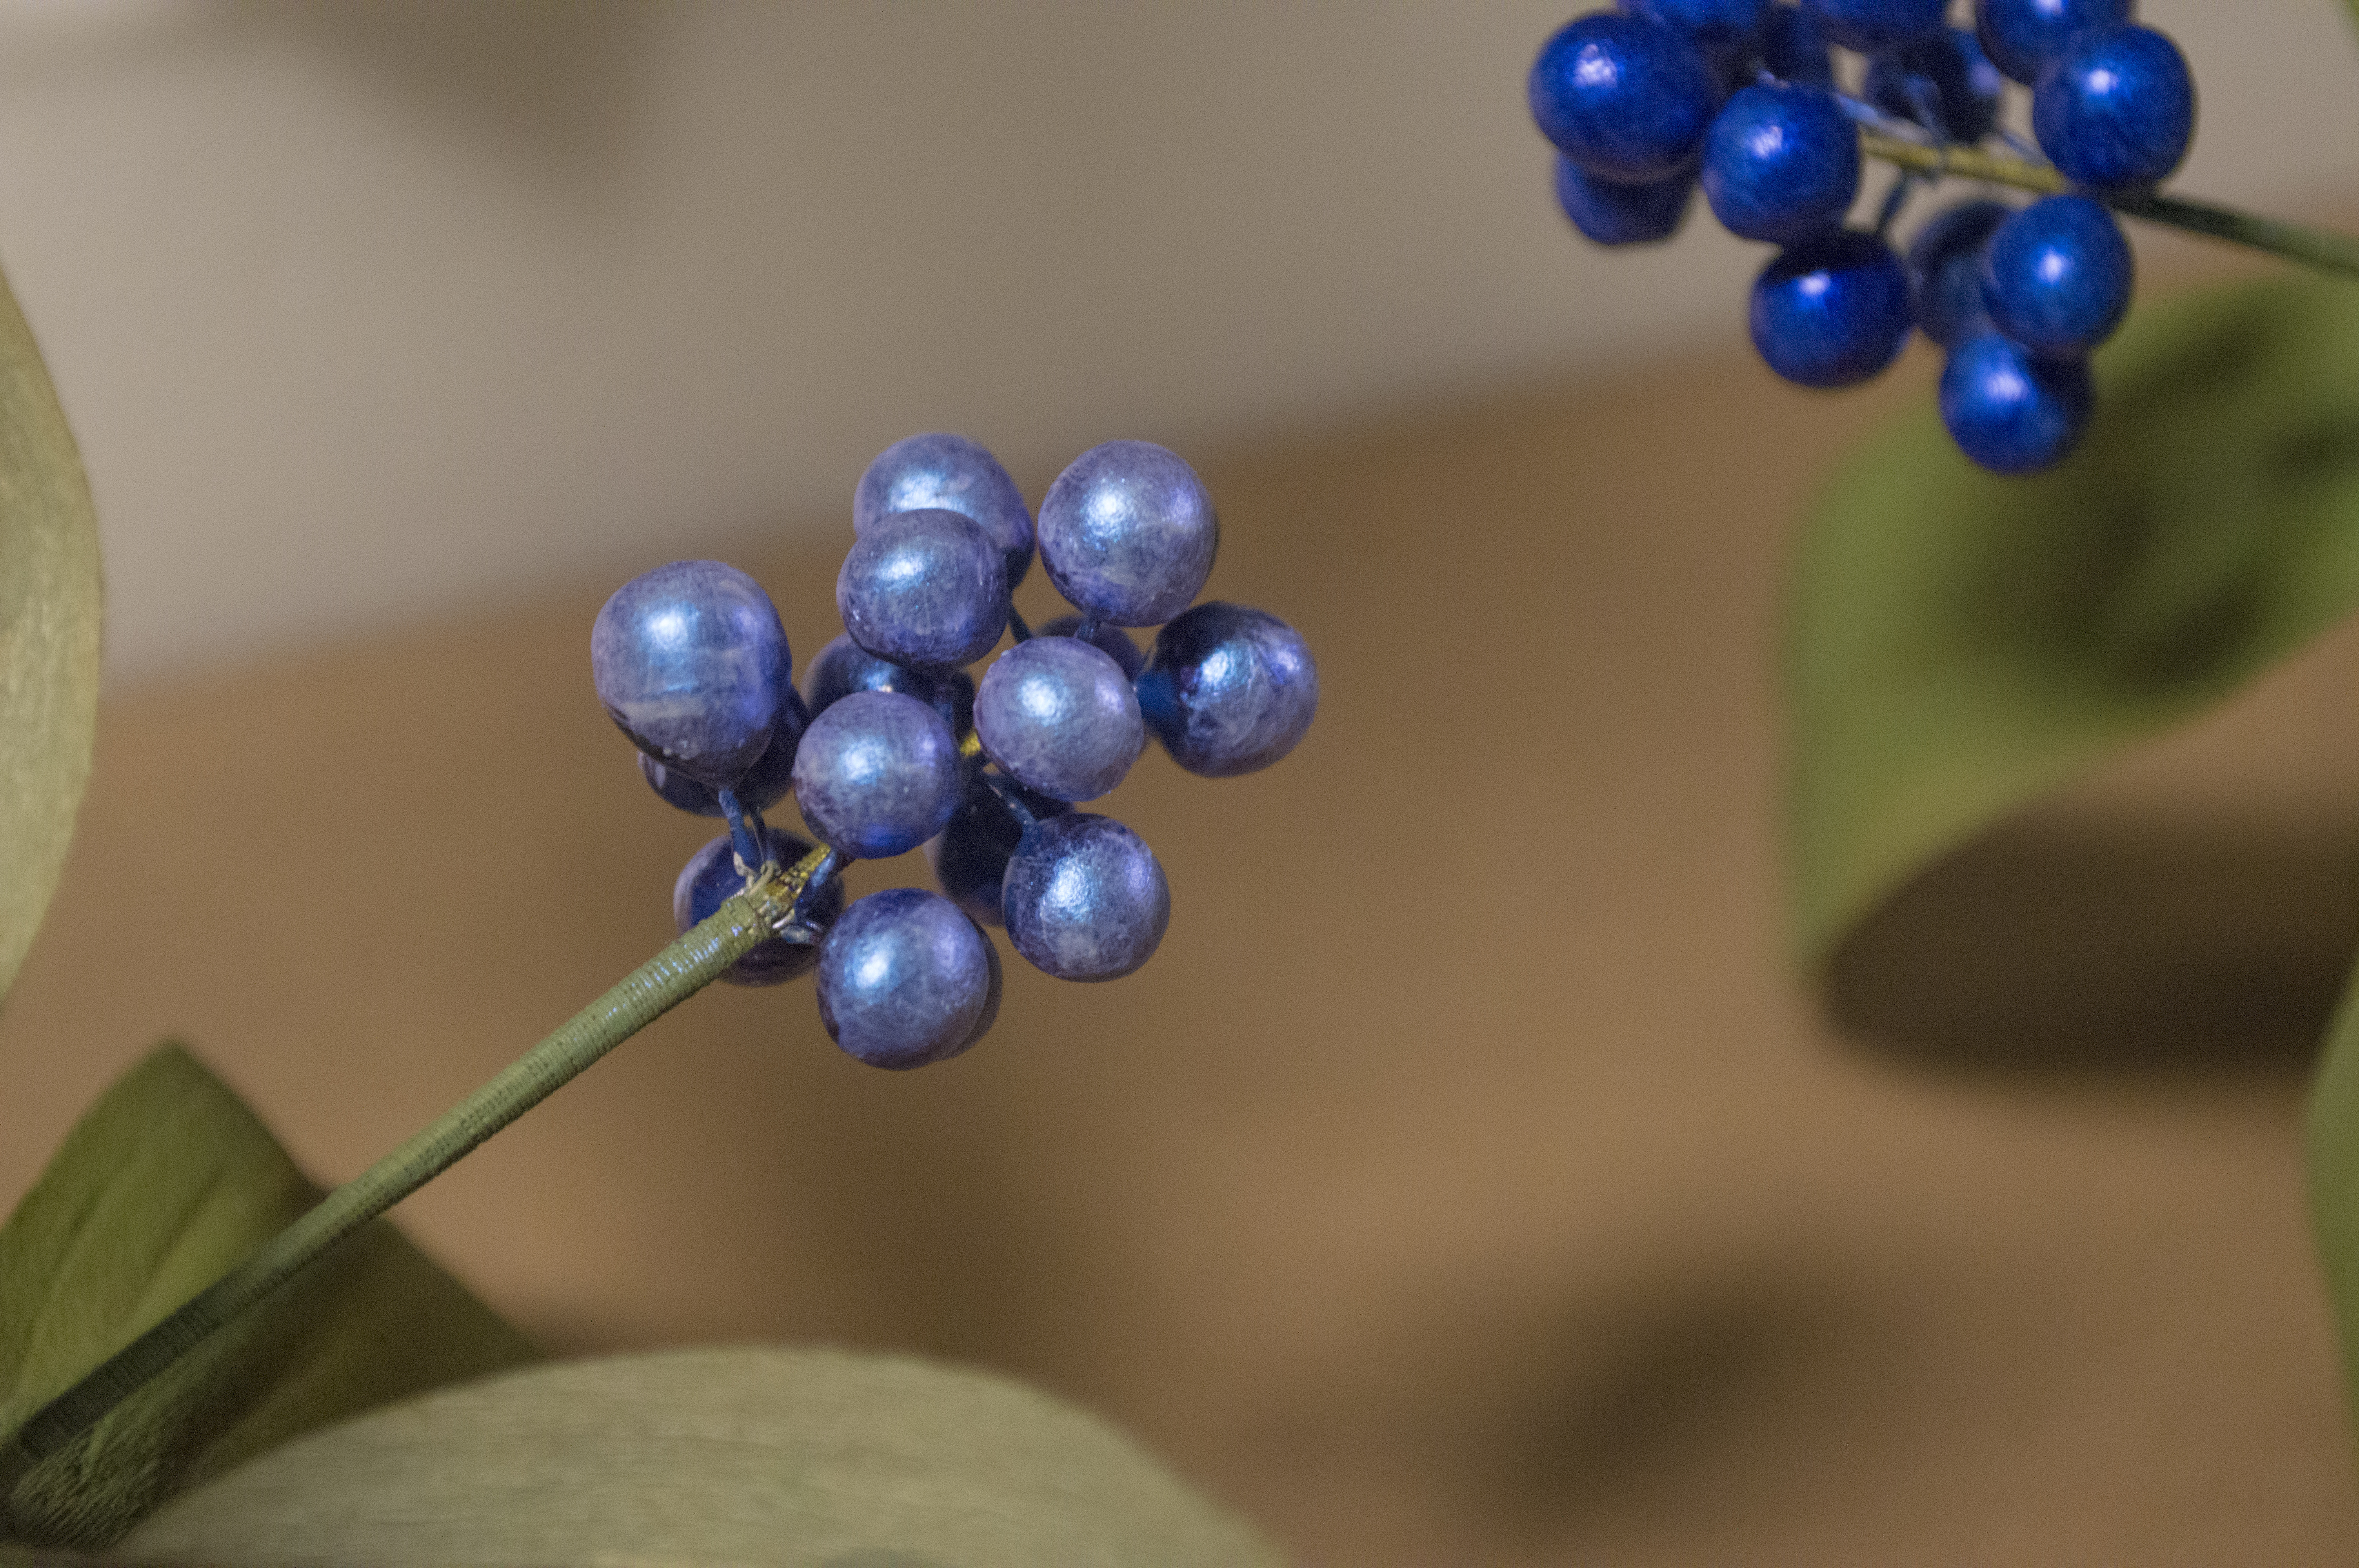 Tiny blue marble berries, before and after